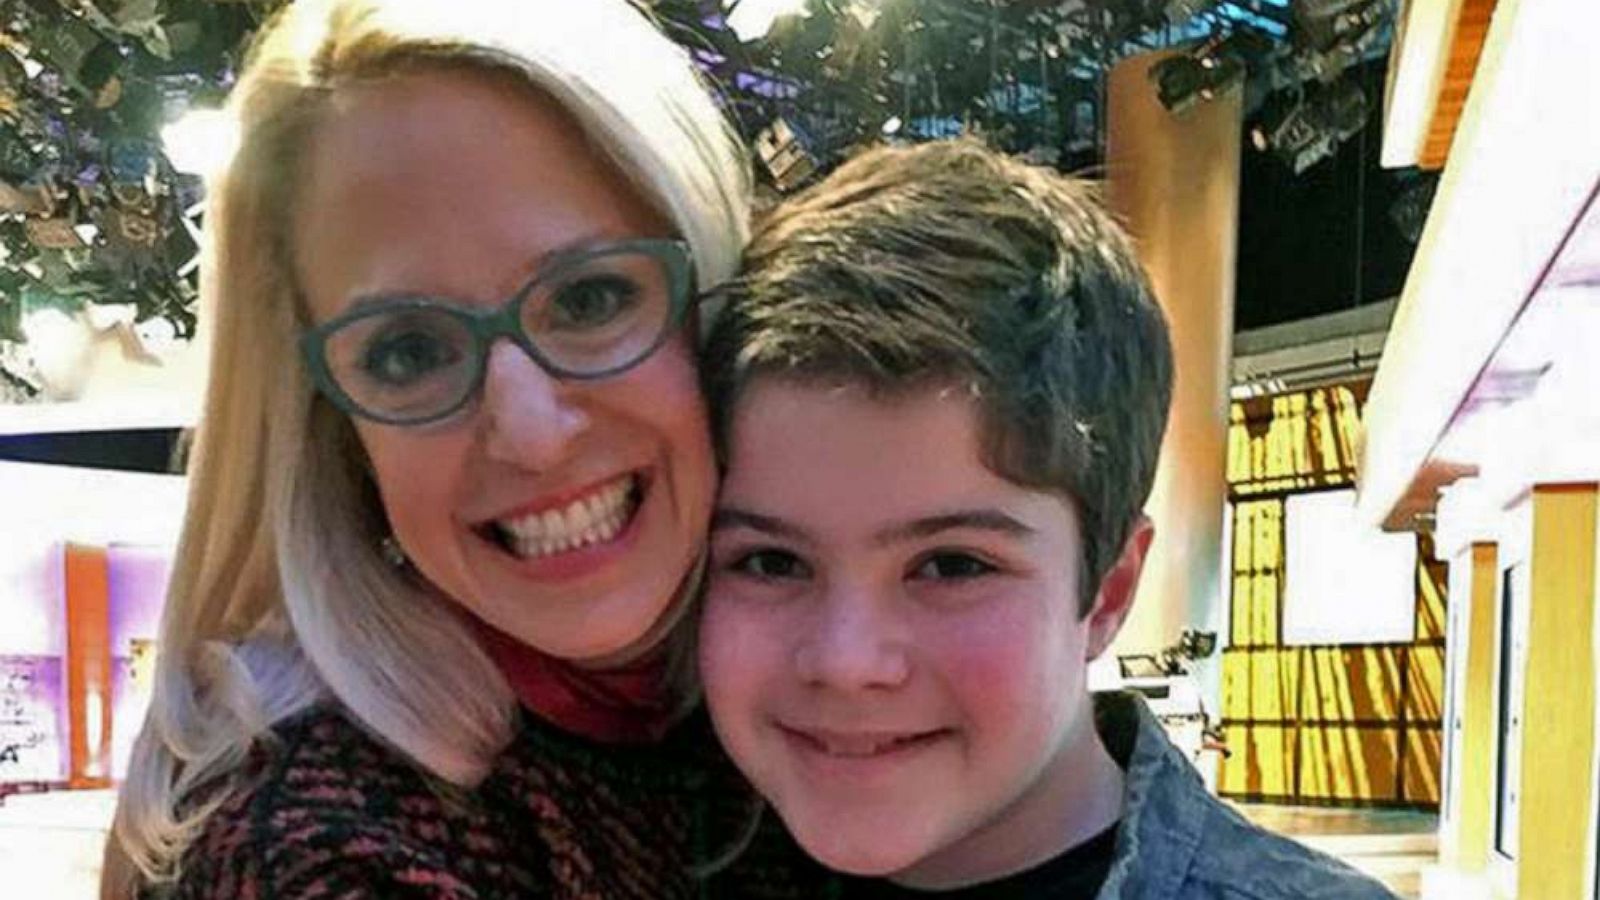 Laura Berman speaks out with warning for parents after son dies of apparent drug overdose picture